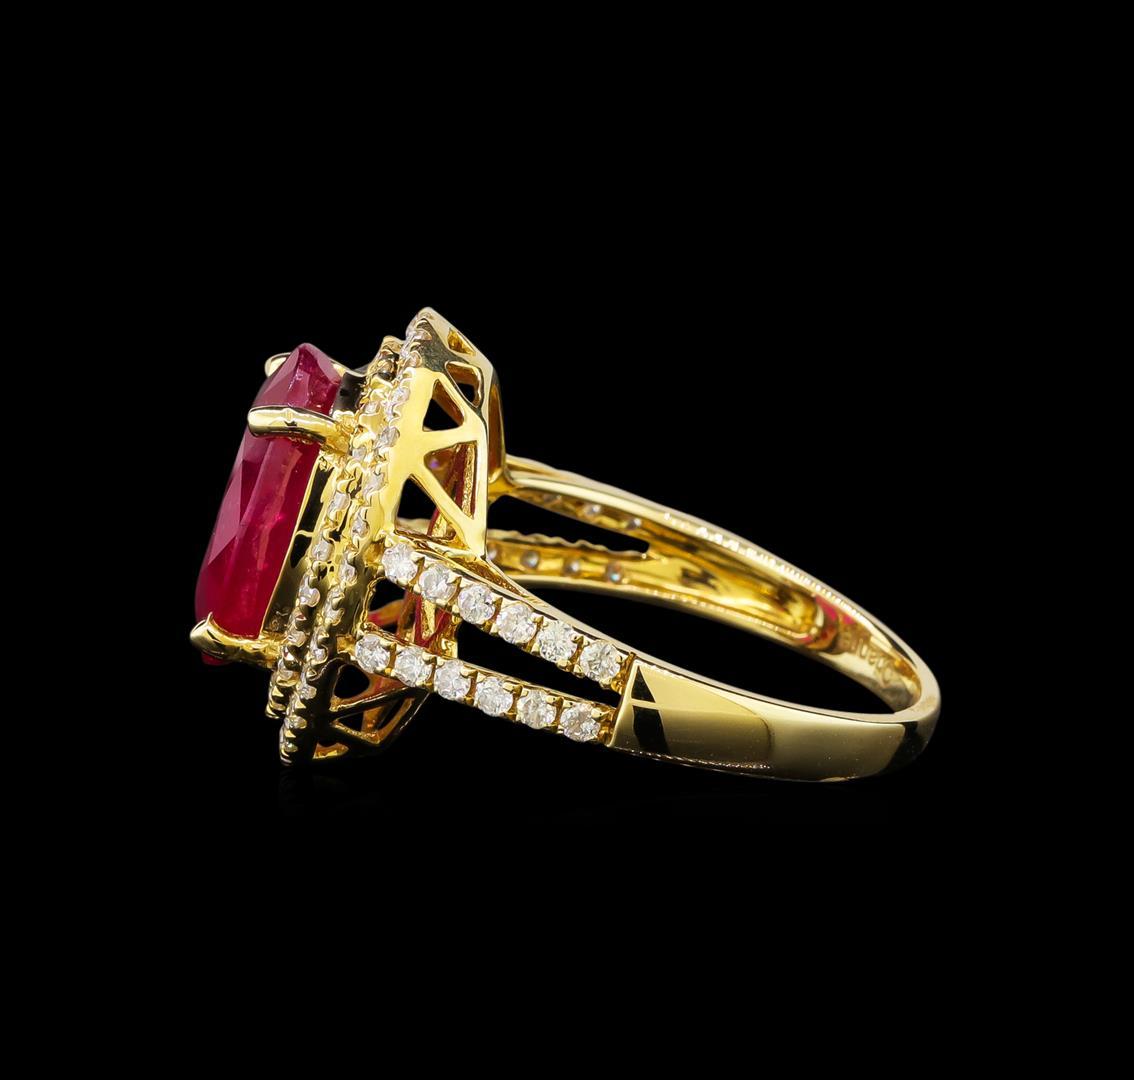 14KT Yellow Gold 4.25 ctw Ruby and Diamond Ring